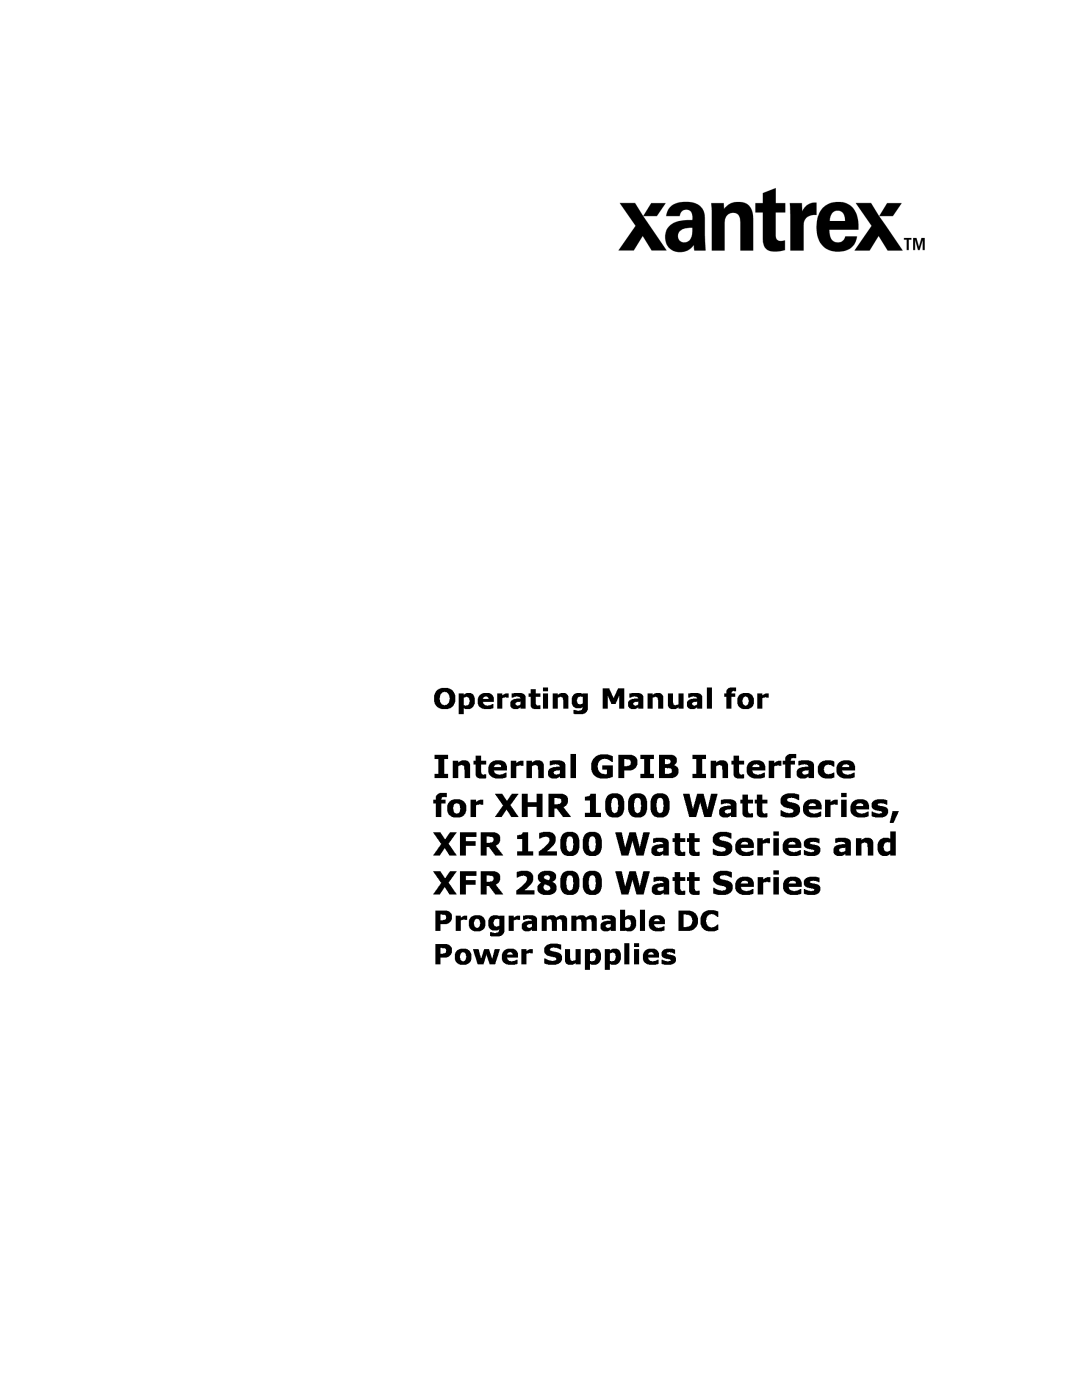 Xantrex Technology XHR, XFR, XFR3 manual Operating Manual for, Programmable DC Power Supplies 